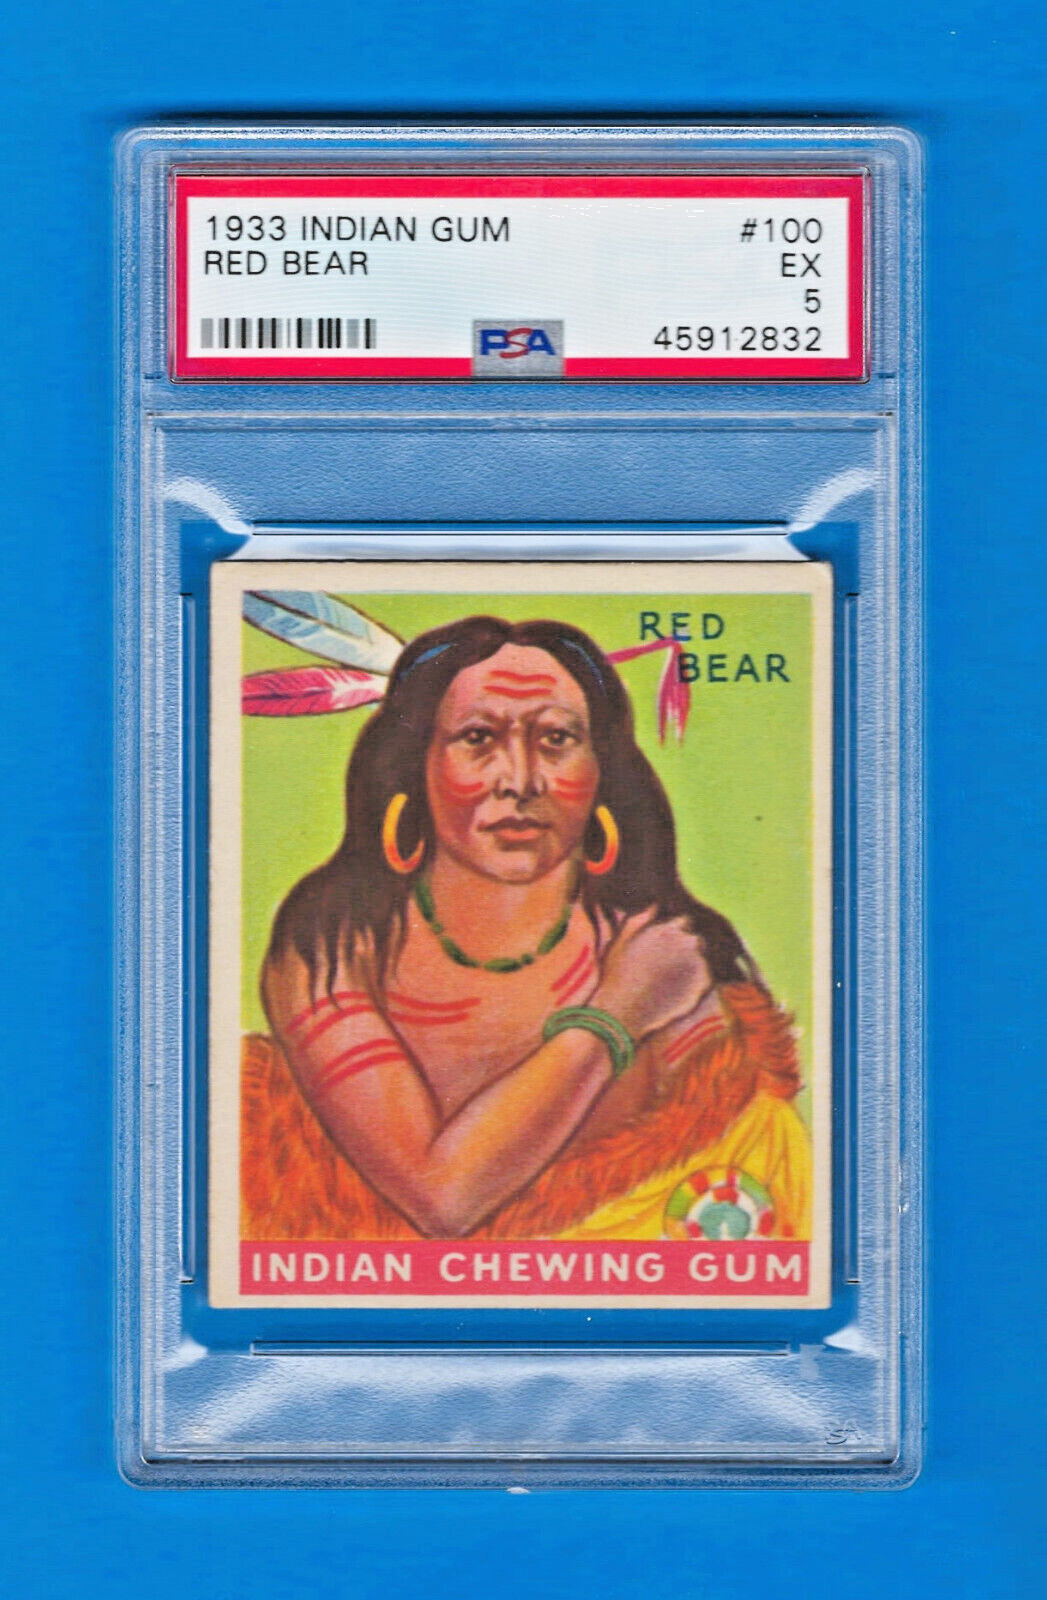 1933 R73 Goudey Indian Gum Card - #100 - RED BEAR - Series of 192 - PSA 5 - EX